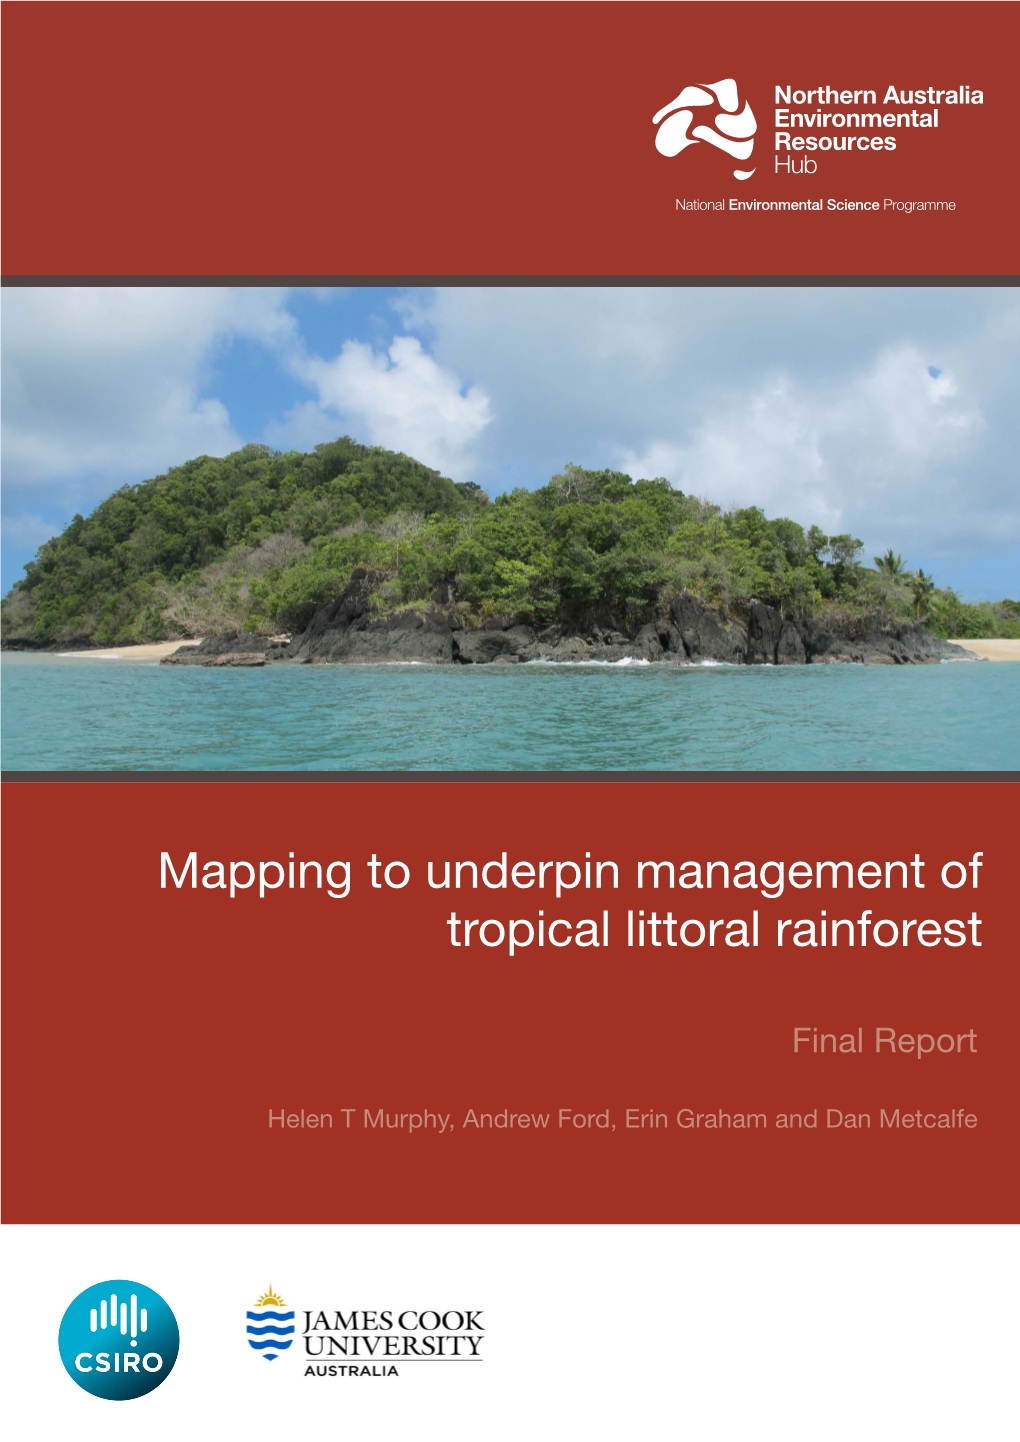 Mapping to Underpin Management of Tropical Littoral Rainforest